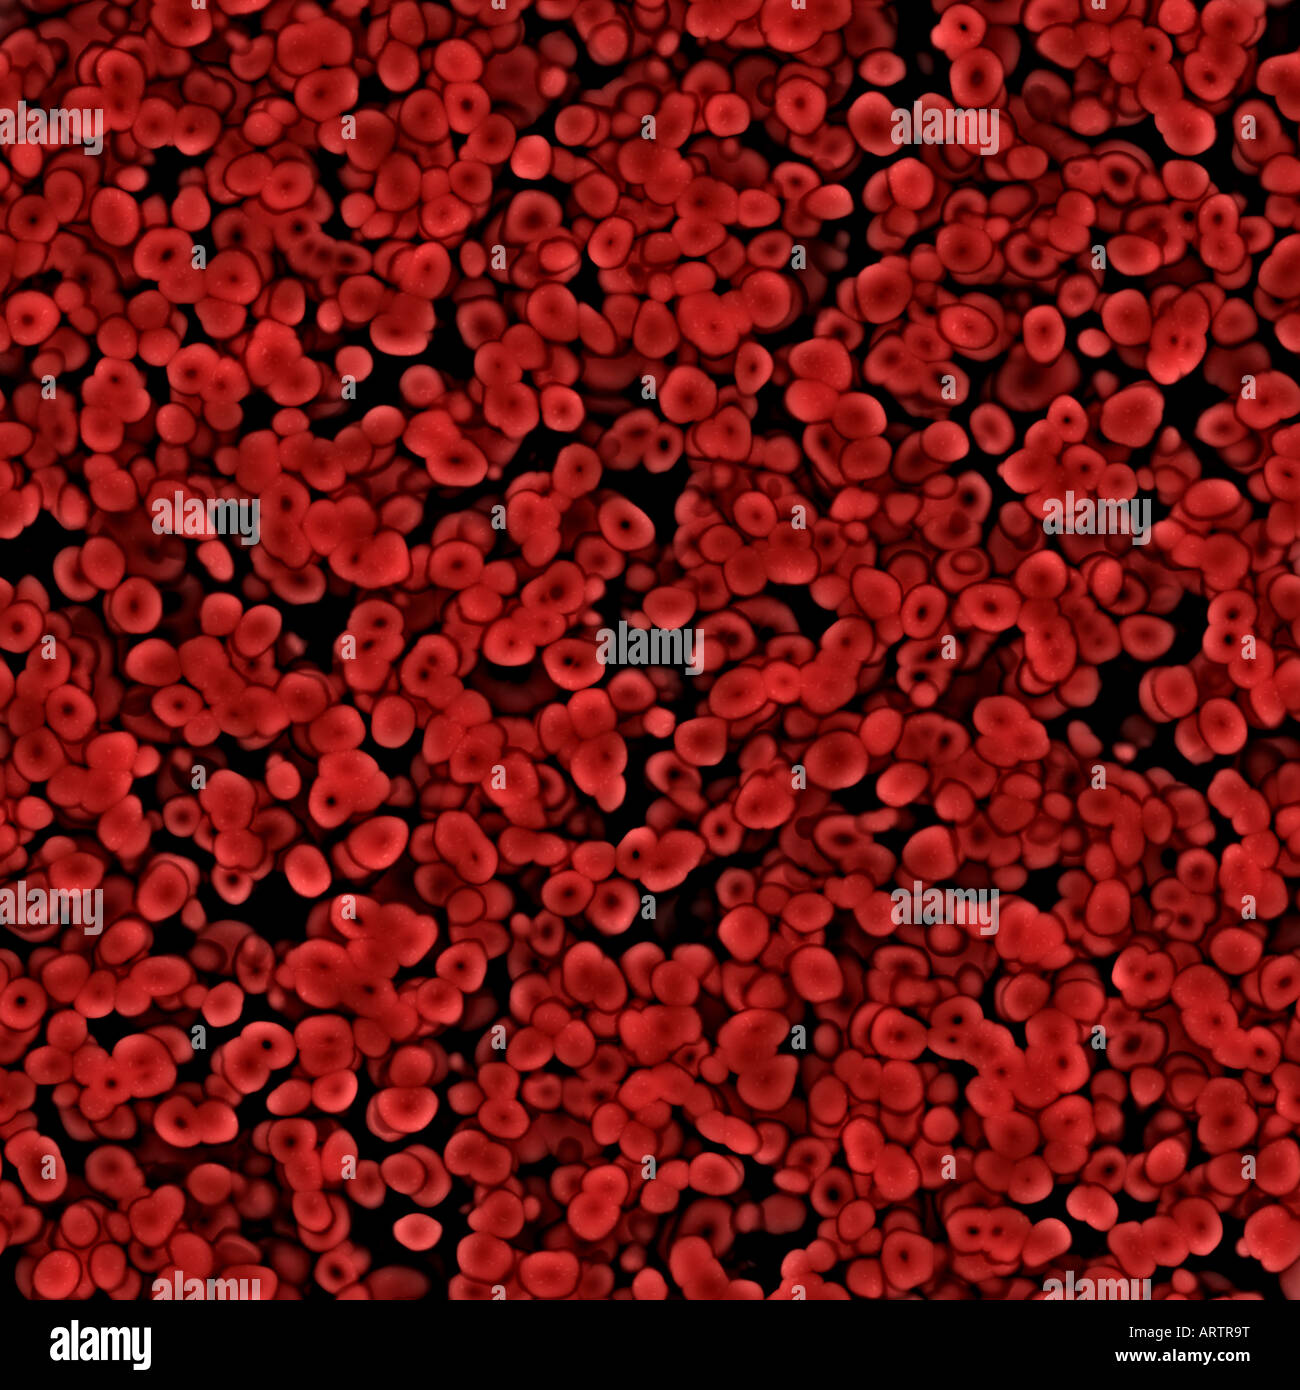 seamless image lots of red blood cells under the microscope Stock Photo